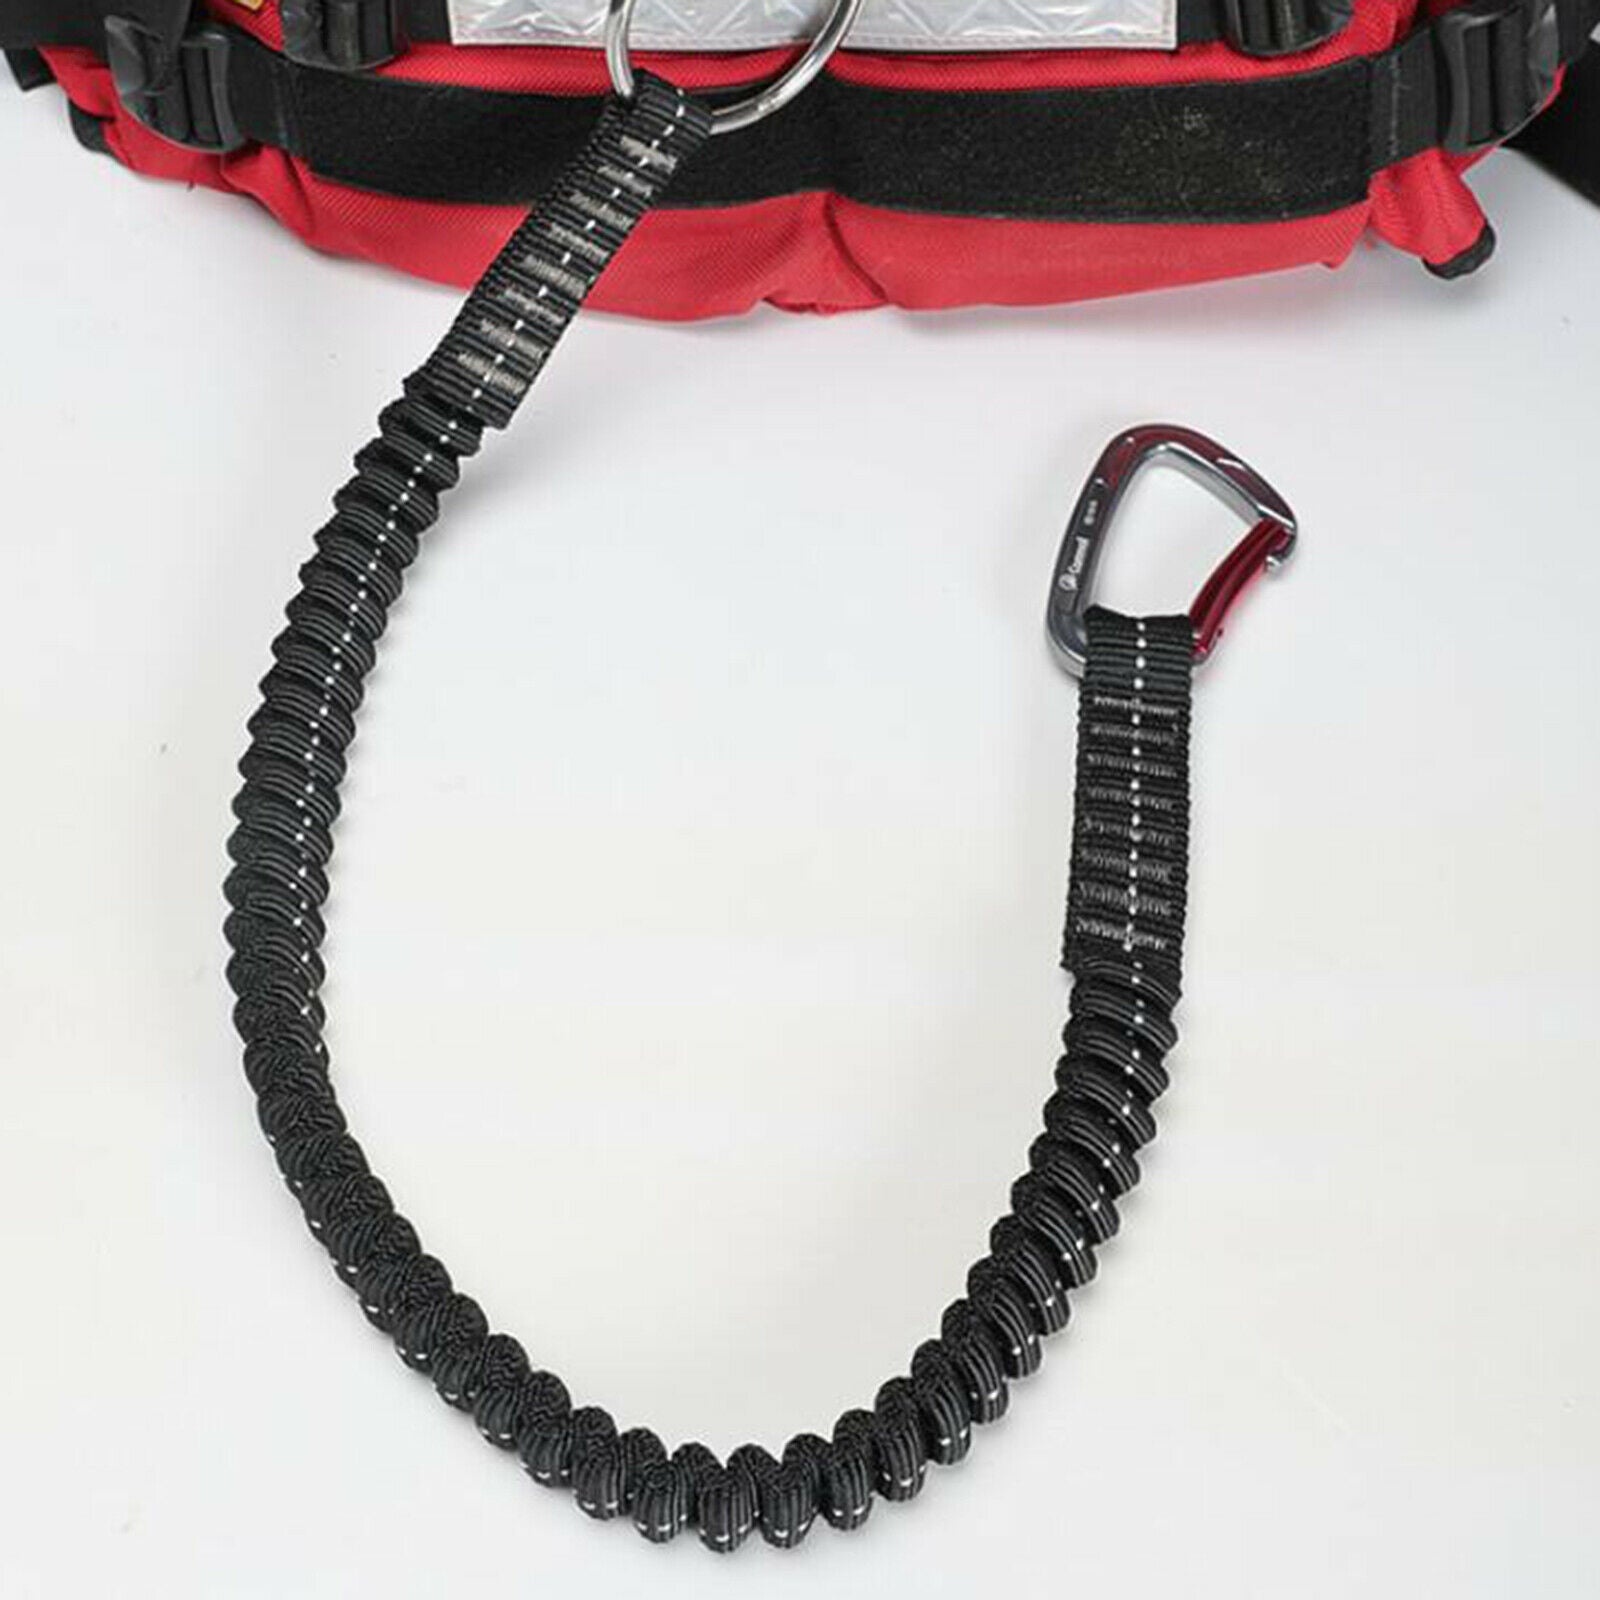 Hunting Safety Harness Emergency Tethering Accessories for Climbing Men